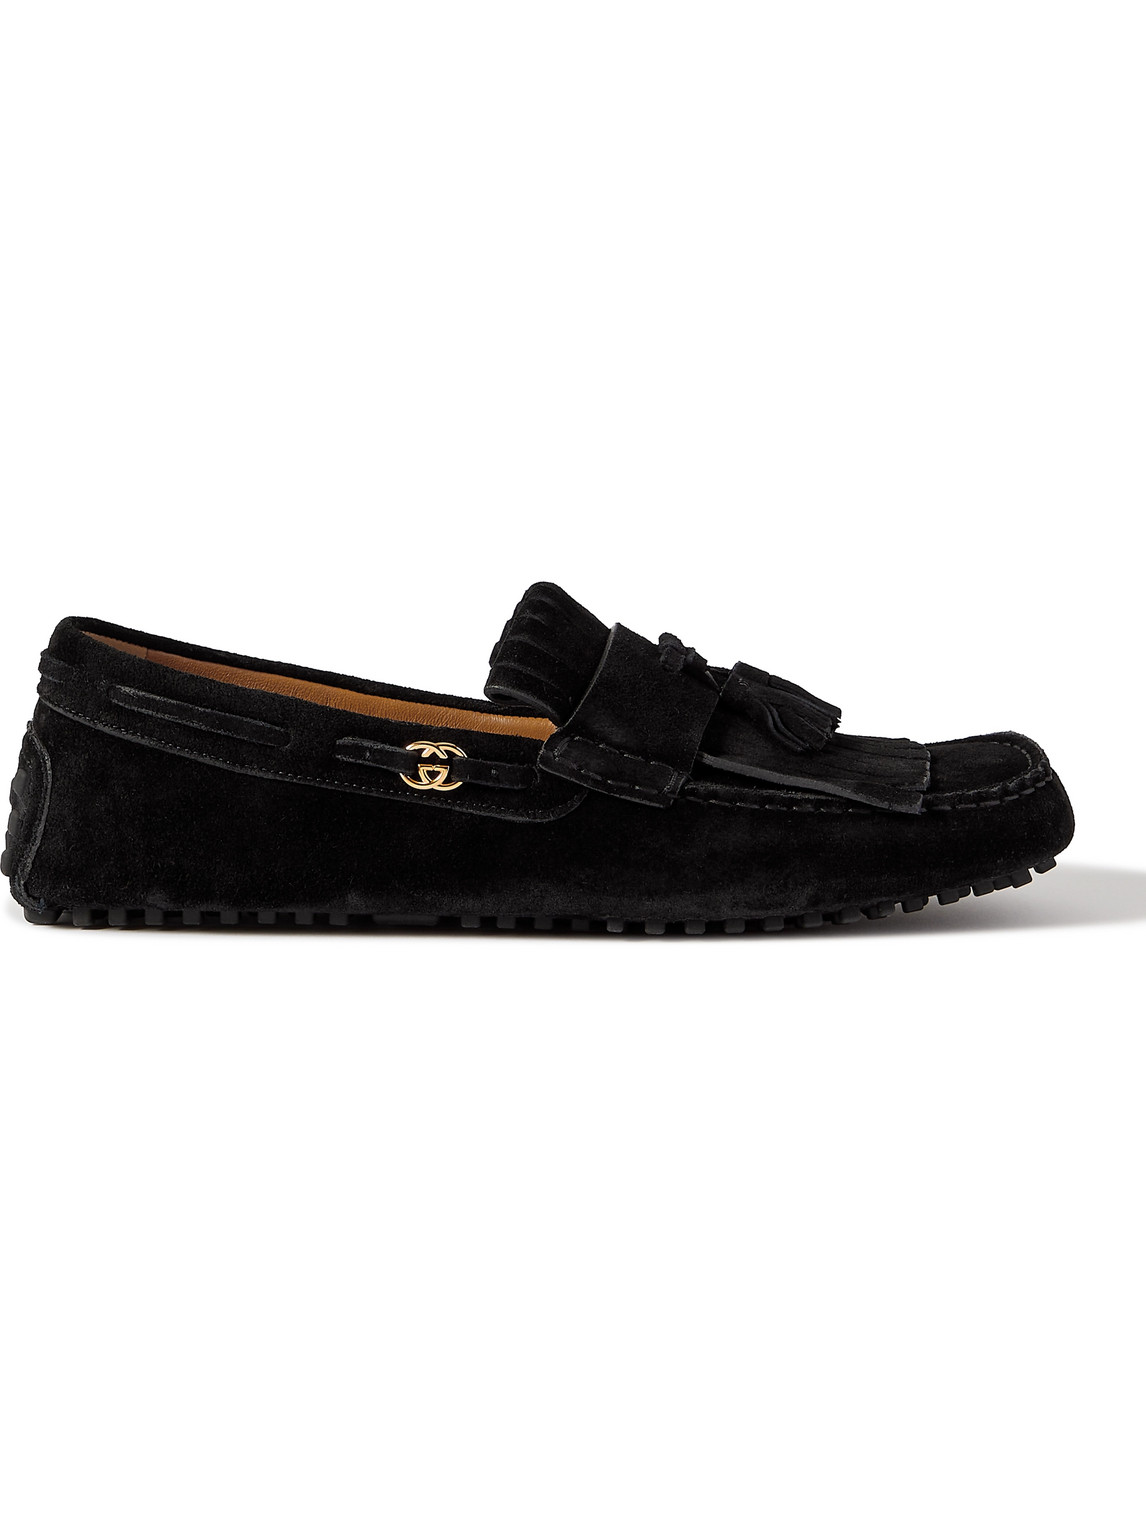 Gucci Ayrton Kilty Suede Tasselled Driving Shoes In Black